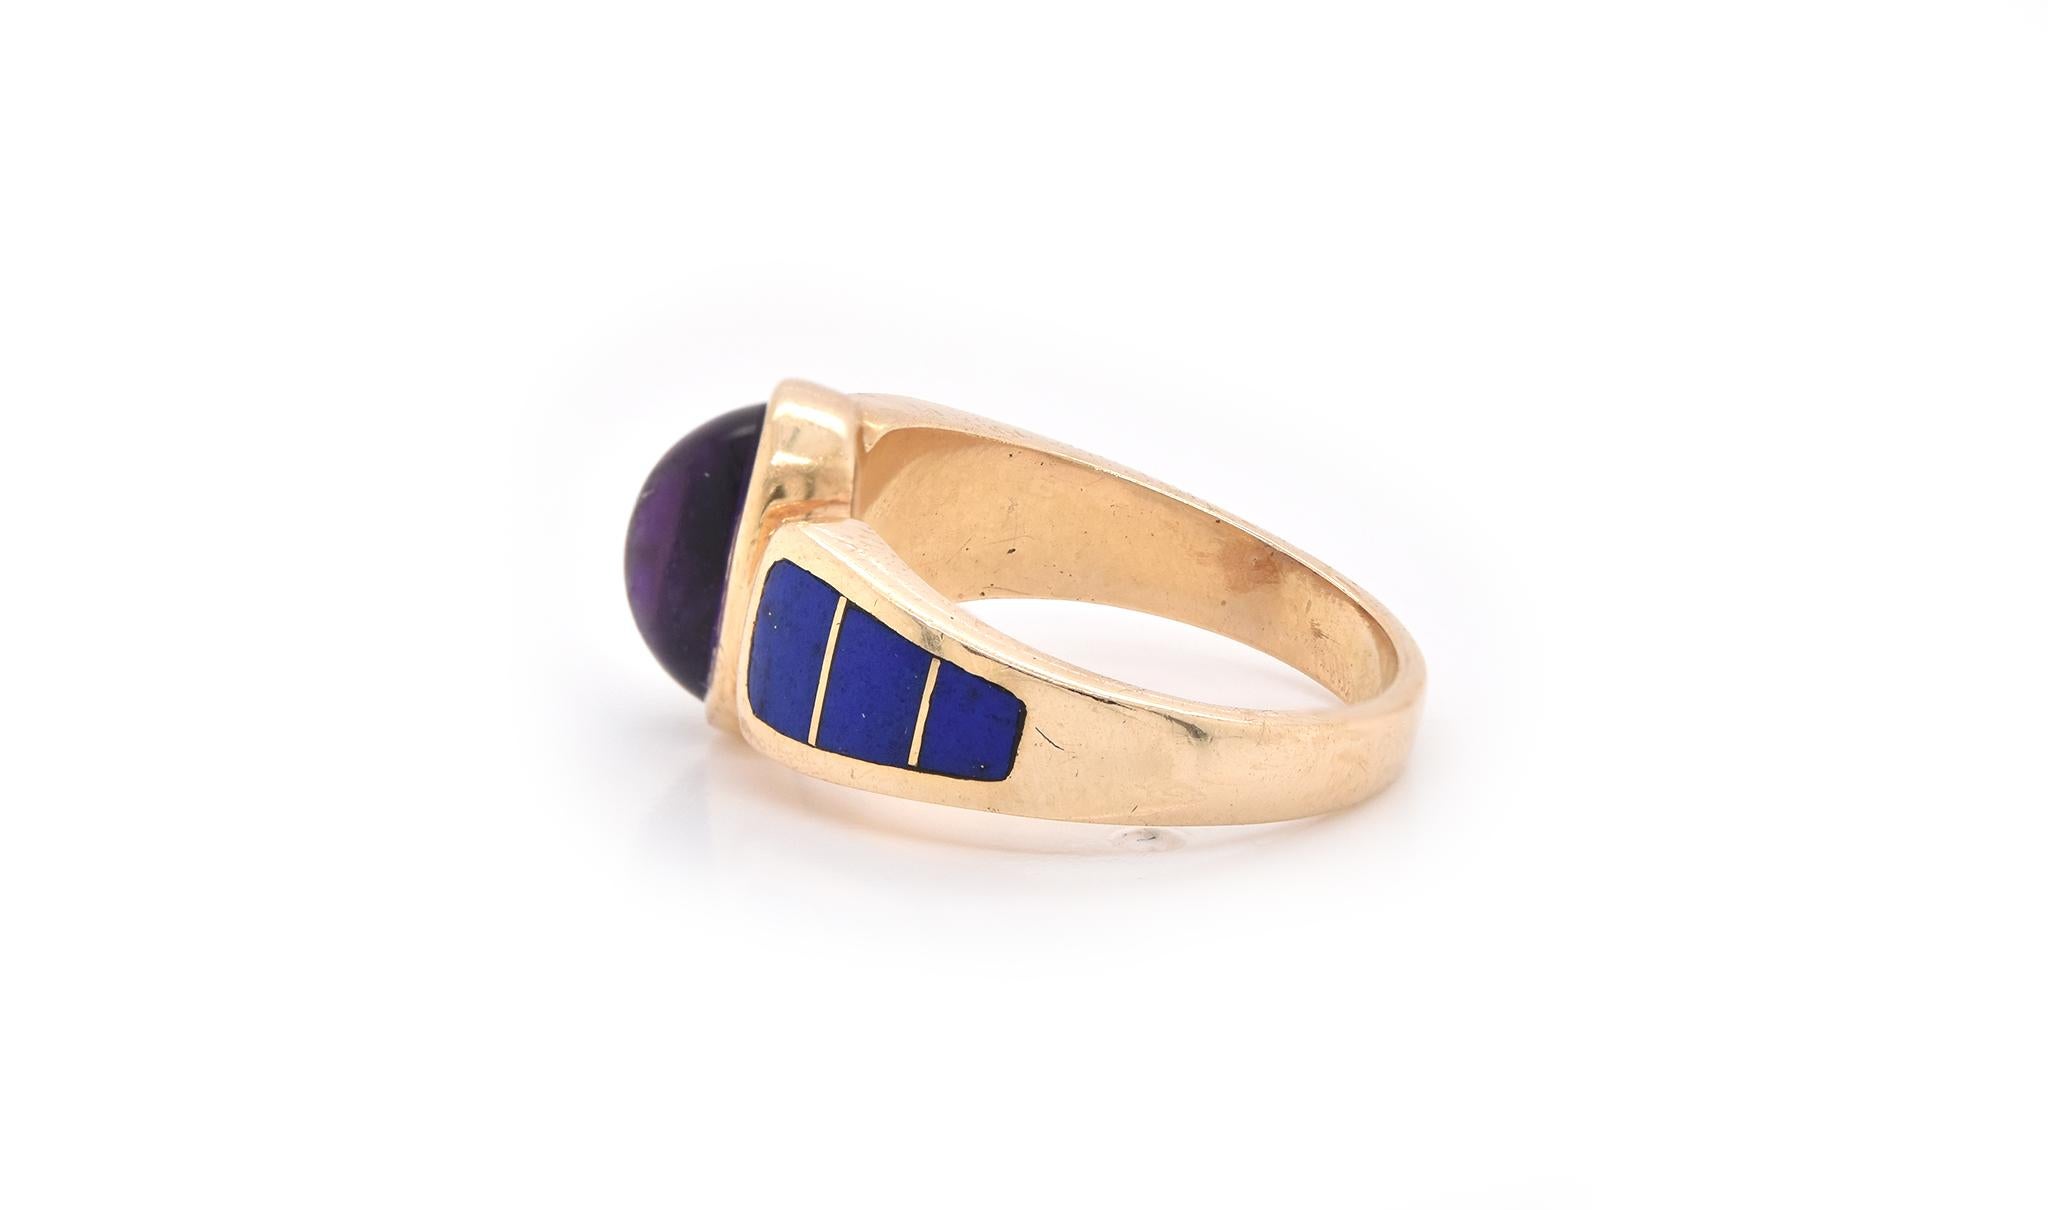 Oval Cut 14 Karat Yellow Gold Cabochon Amethyst Ring with Lapis